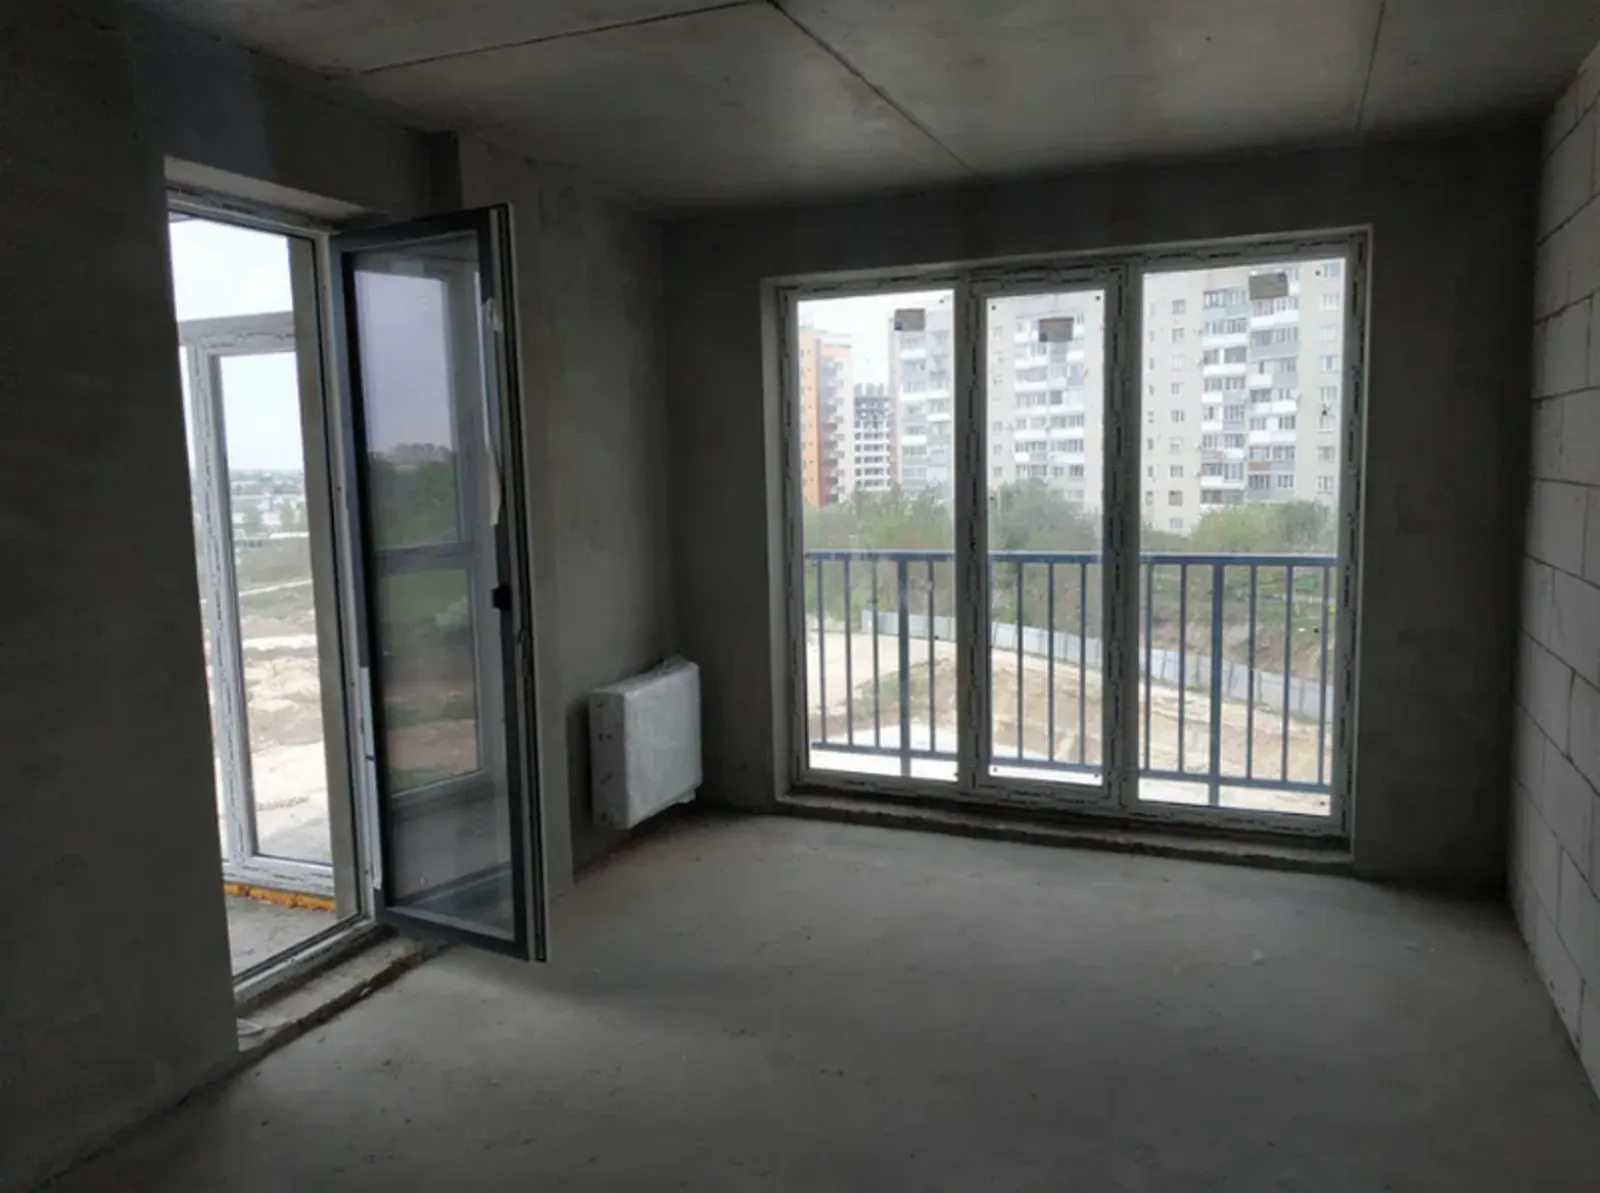 Apartments for sale. 2 rooms, 55 m², 4th floor/13 floors. Bam, Ternopil. 